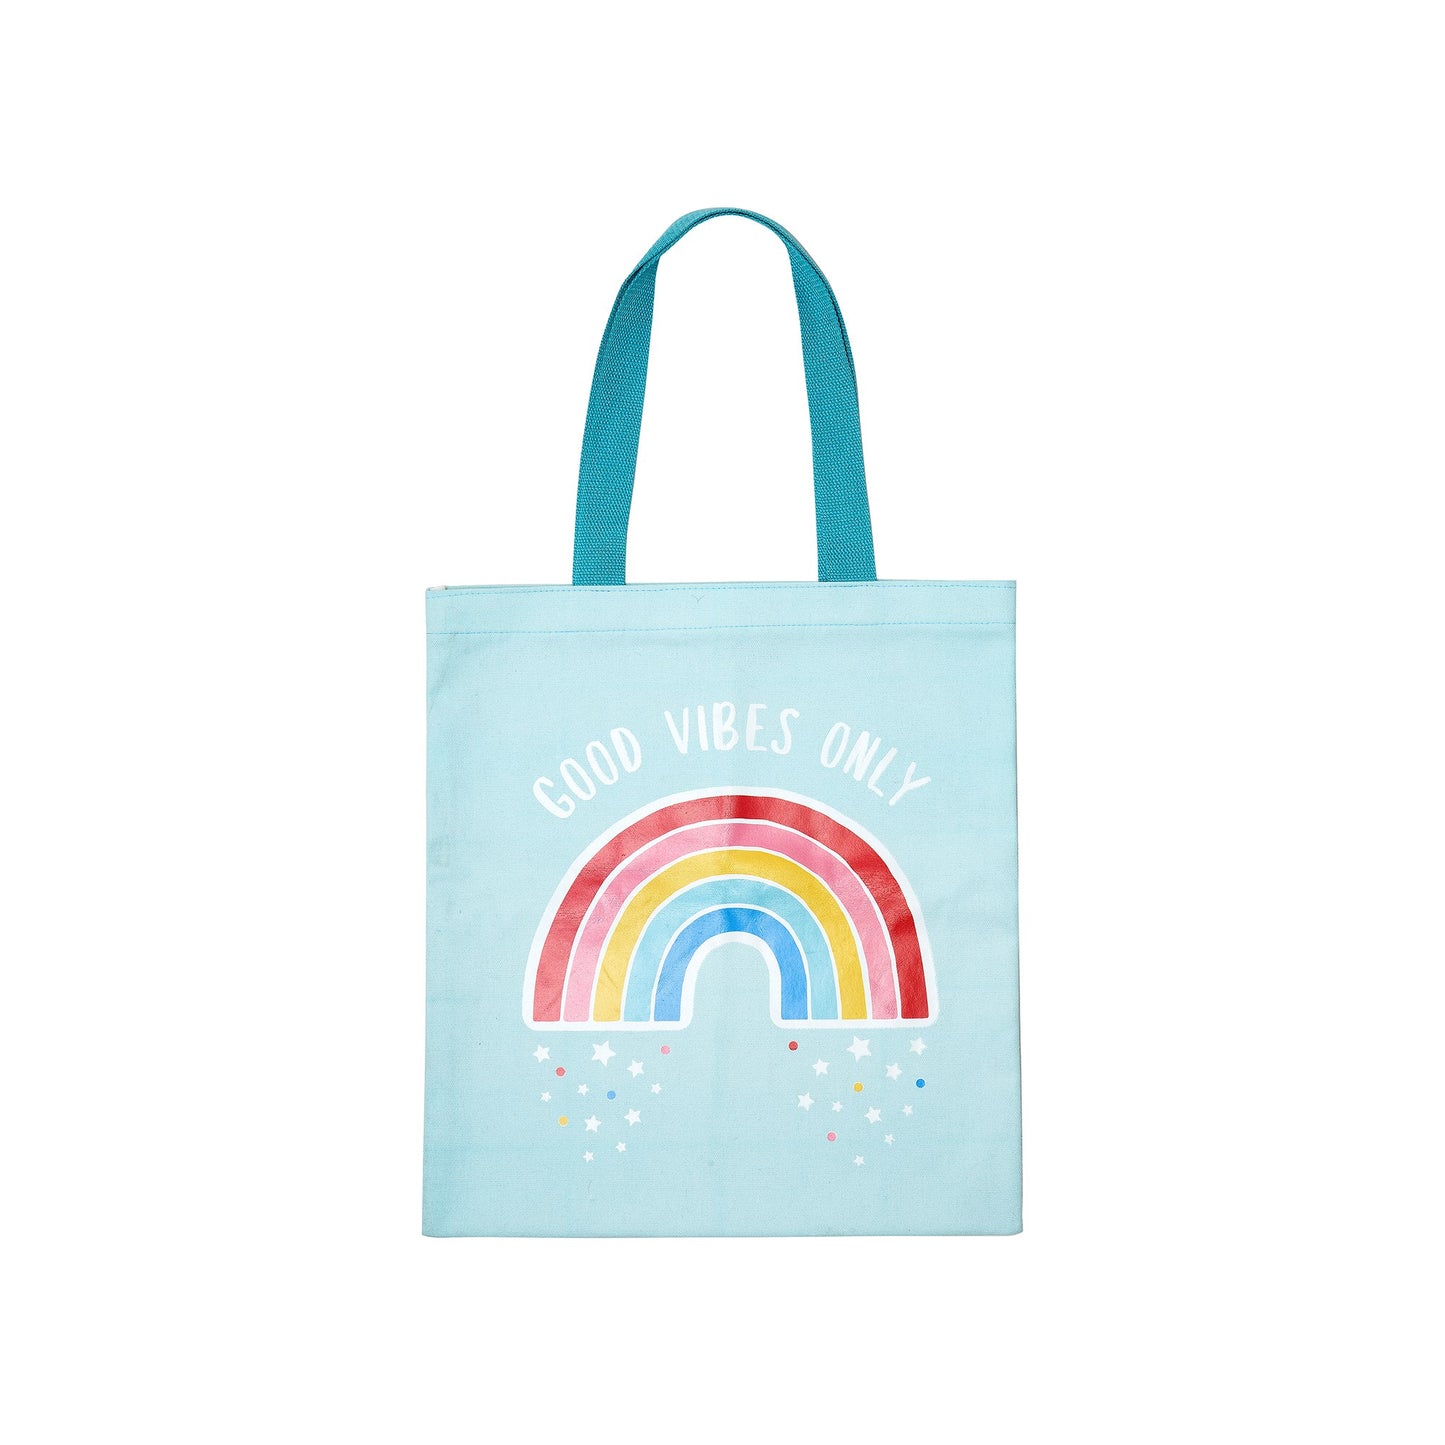 Gorgeous 'Good Vibes Only' slogan tote bag in sky blue, featuring a vibrant rainbow motif. 